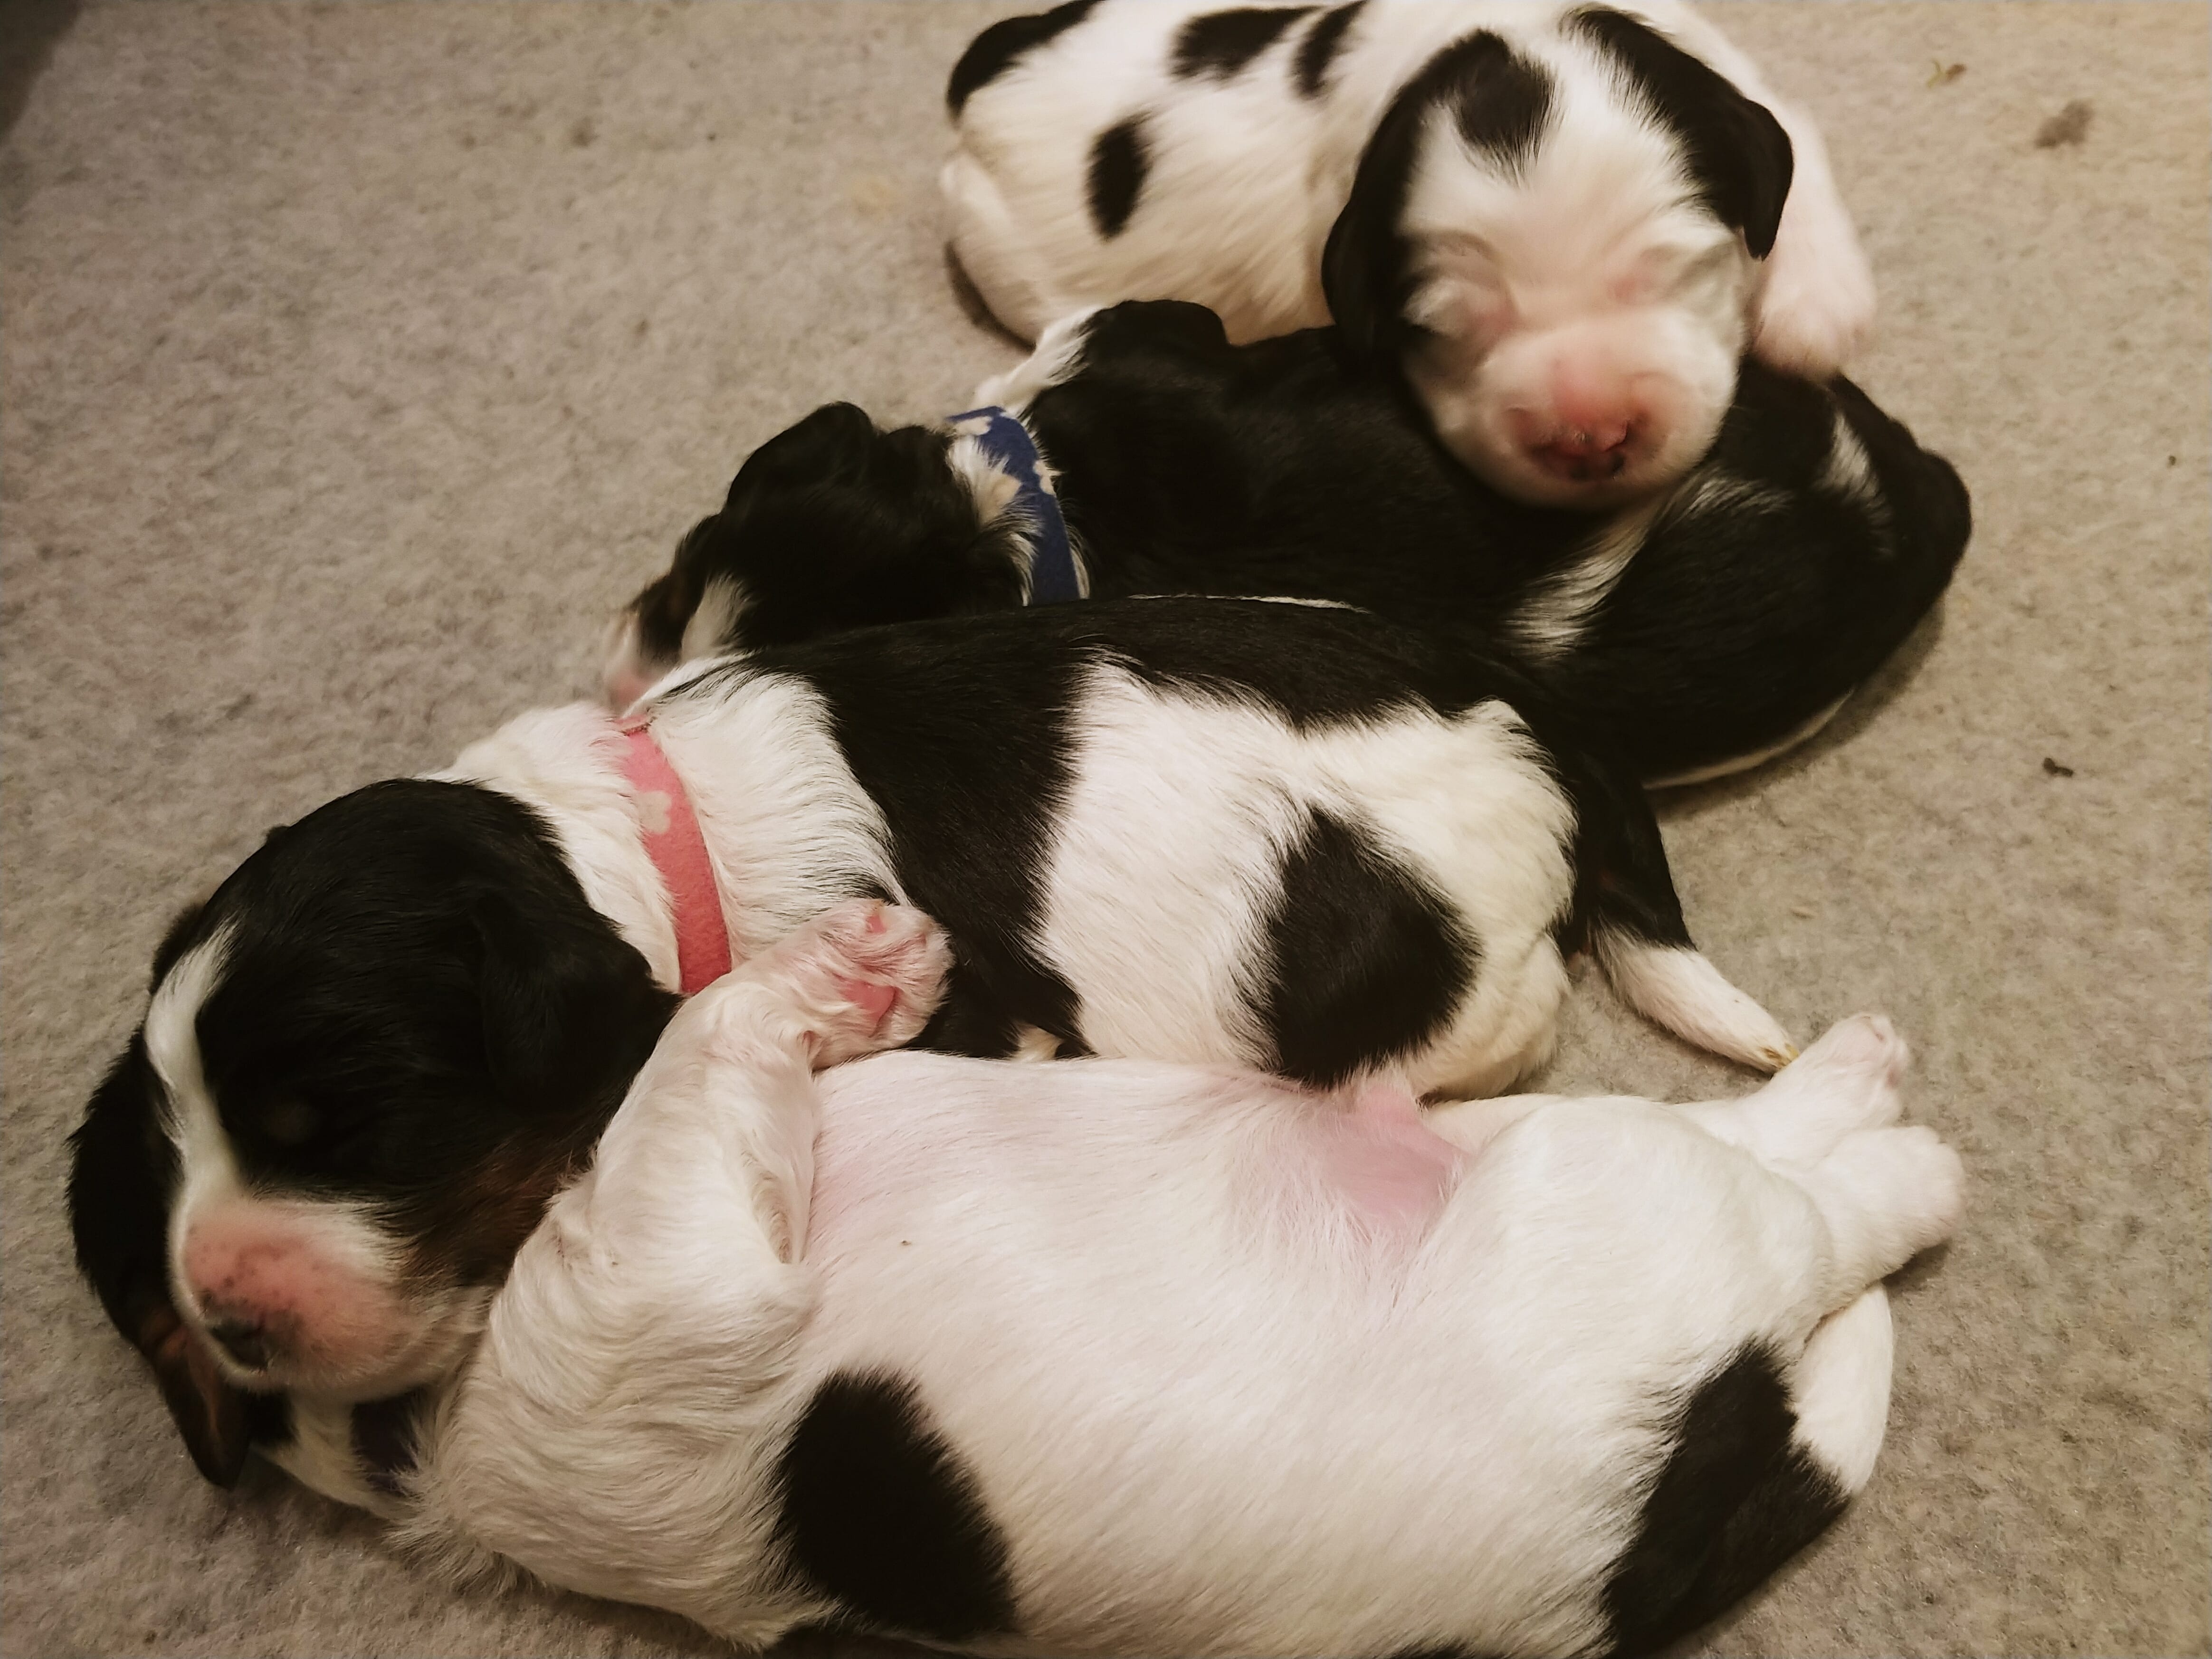 Four 2-week old black and white labradoodle puppies. Lying with their heads on each other on a cream colored rug.